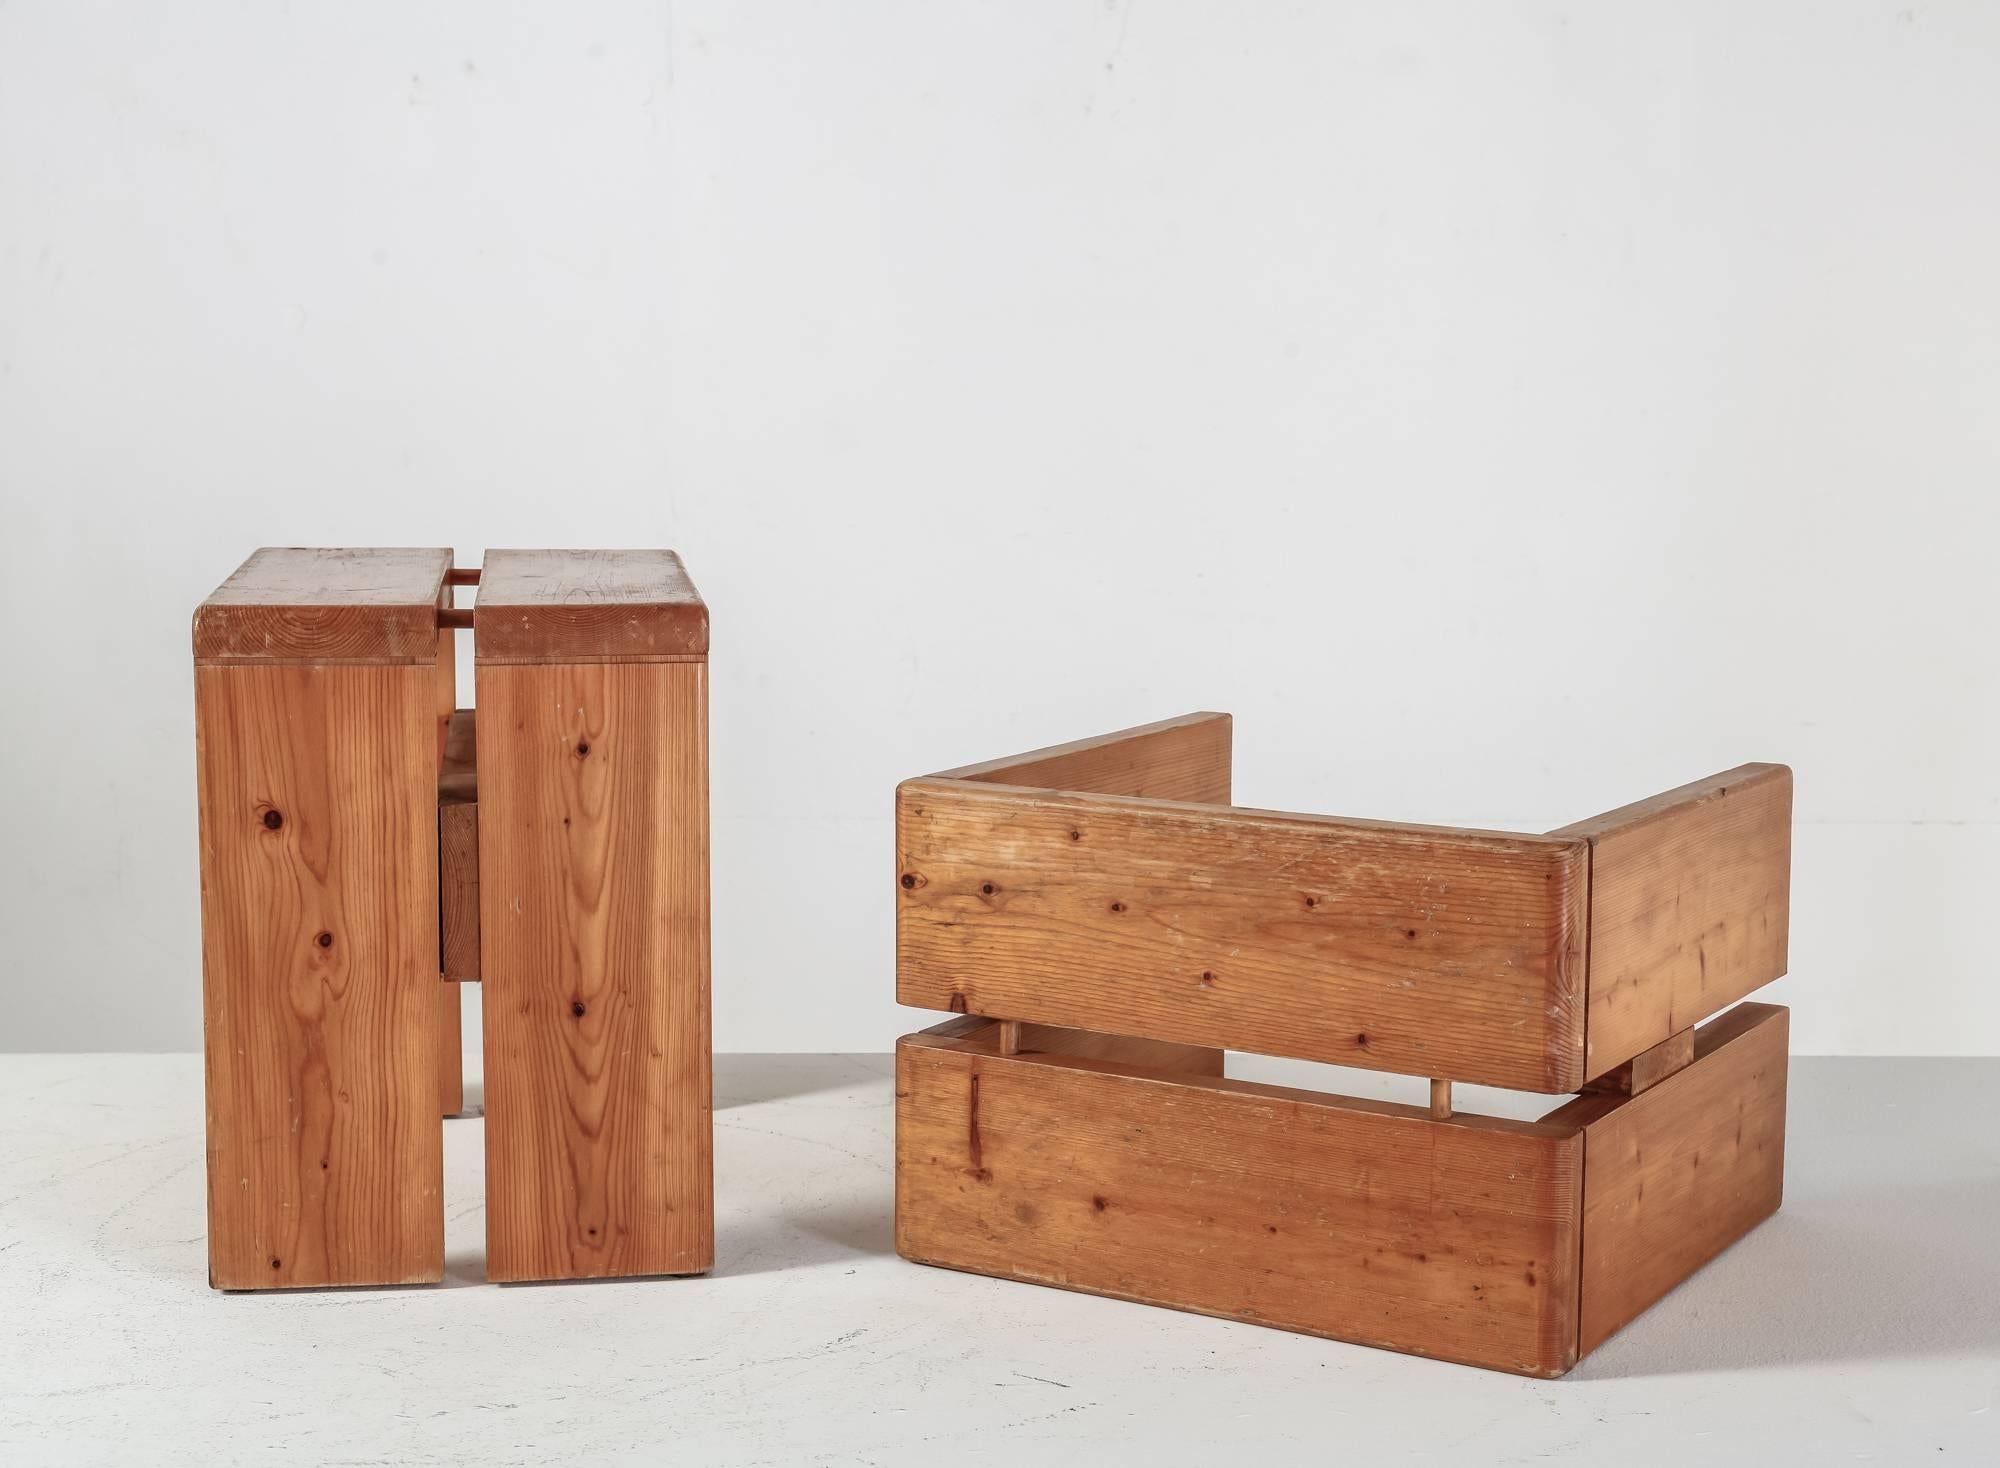 A pair of Charlotte Perriand rectangular stools made of pine. These stools were designed for the Arc 1600 ski resort in Les Arcs (1967-1969), built by a team of architects, including Perriand.

These stools show Perriand's sturdy Campagne style